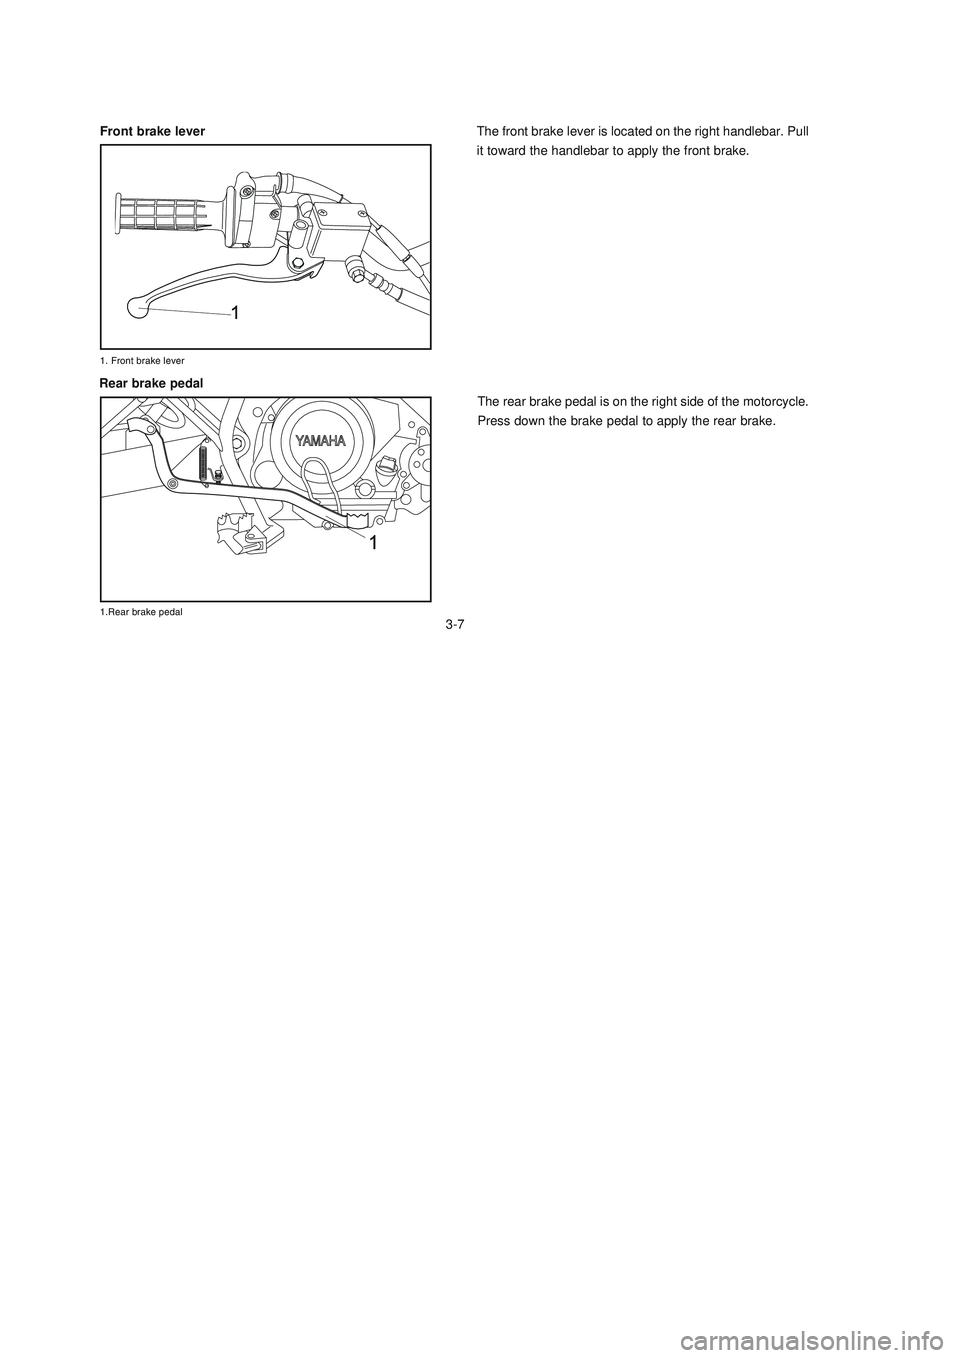 YAMAHA XTZ125 2008  Owners Manual 3-7
3-7
The front brake lever is located on the right handlebar. Pull
it toward the handlebar to apply the front brake.
The rear brake pedal is on the right side of the motorcycle.
Press down the brak